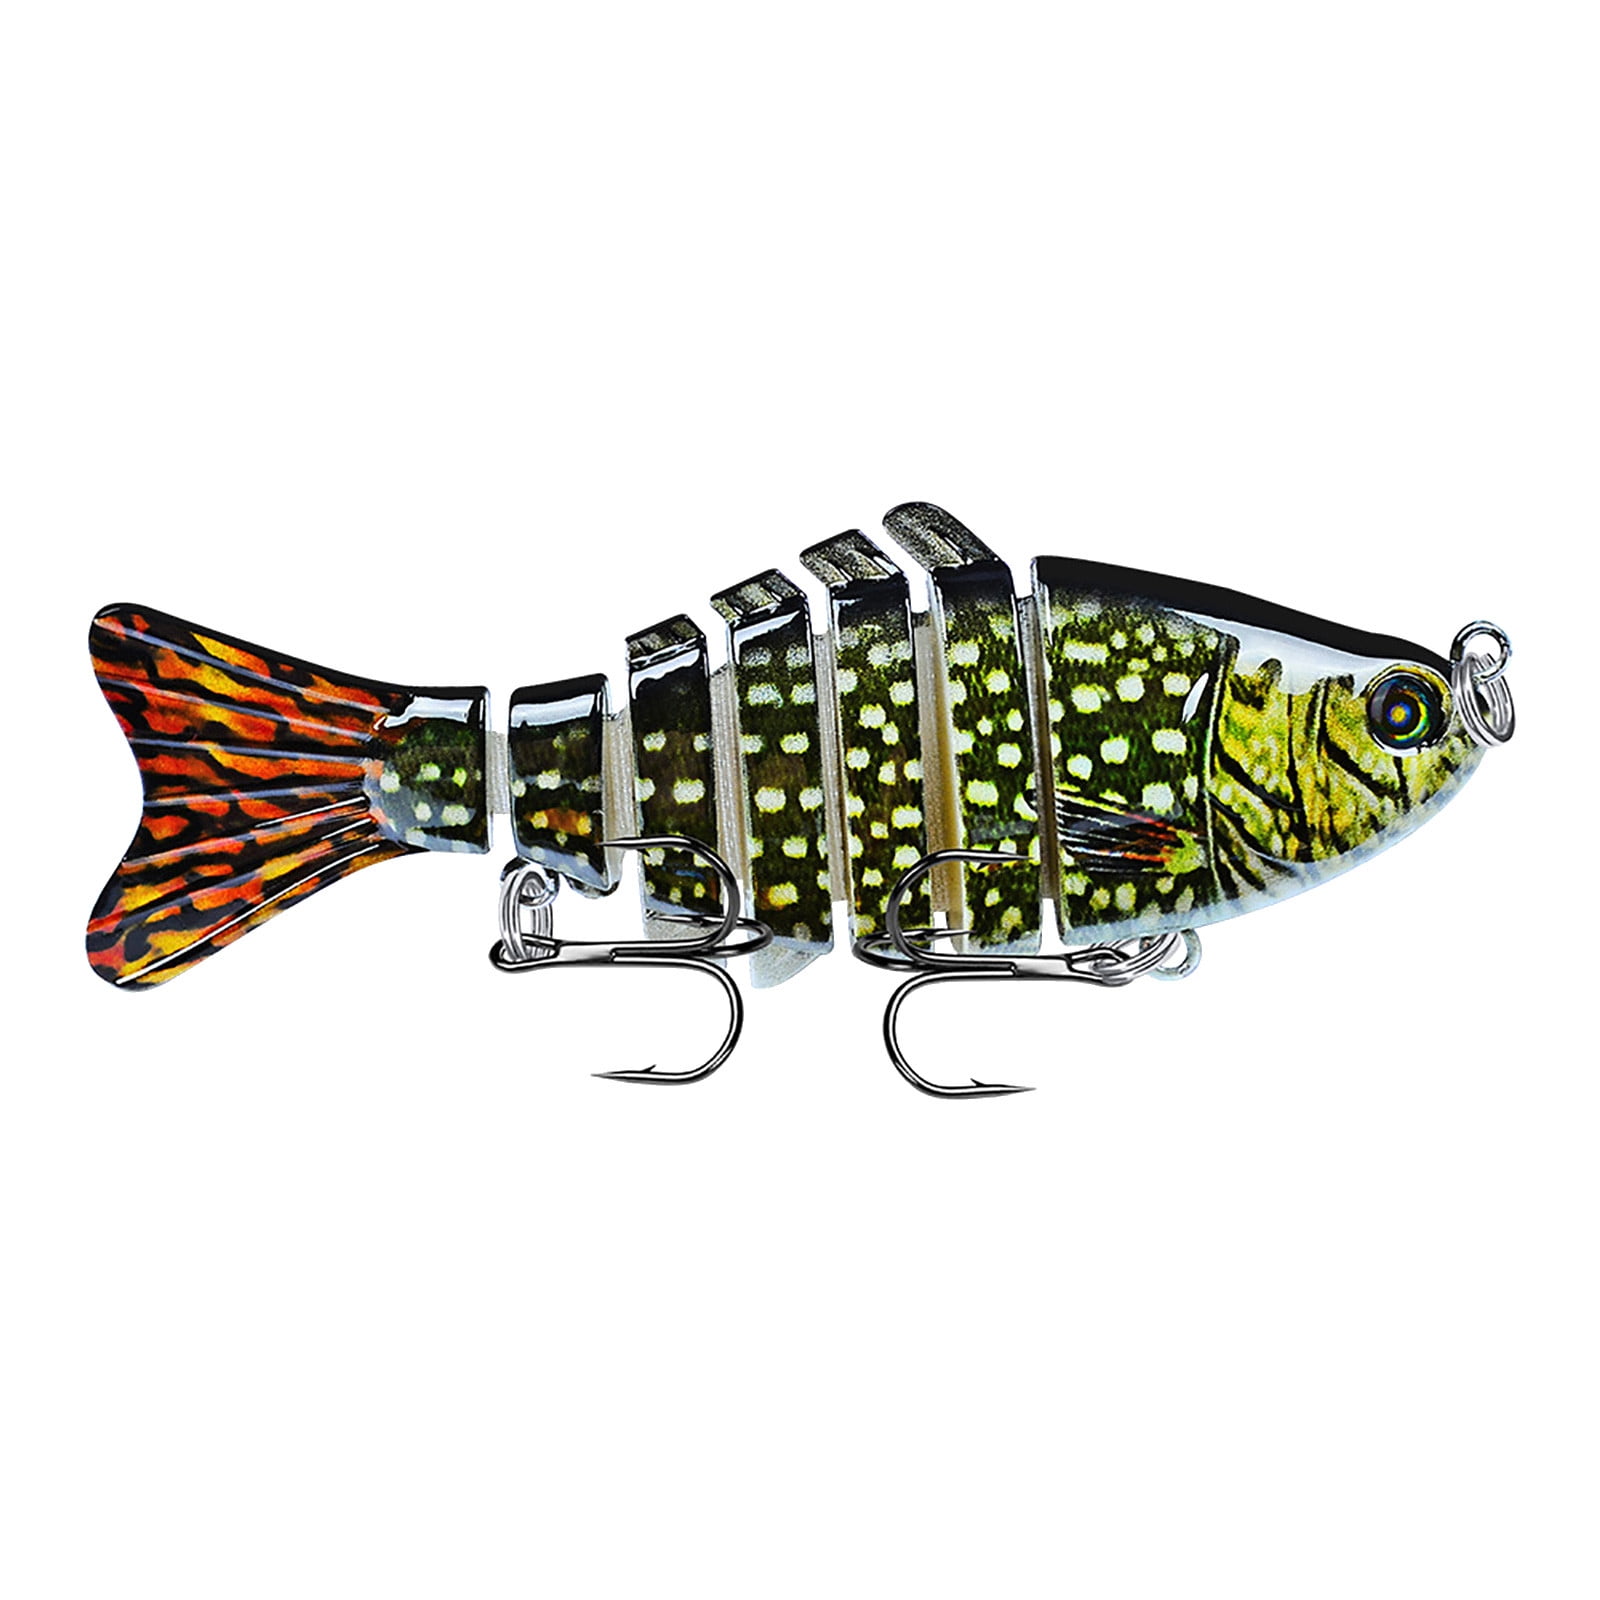 Fishing Lures for Bass Trout Multi Jointed Swimbait Slow Sinking Bionic  Swimming Lures Micro-Jointed Swimbait, 10cm Road Sub Bait Plastic Hard Bait,  15.5g Multi Knot Fish Simulation Bait Pseudo Bait C 